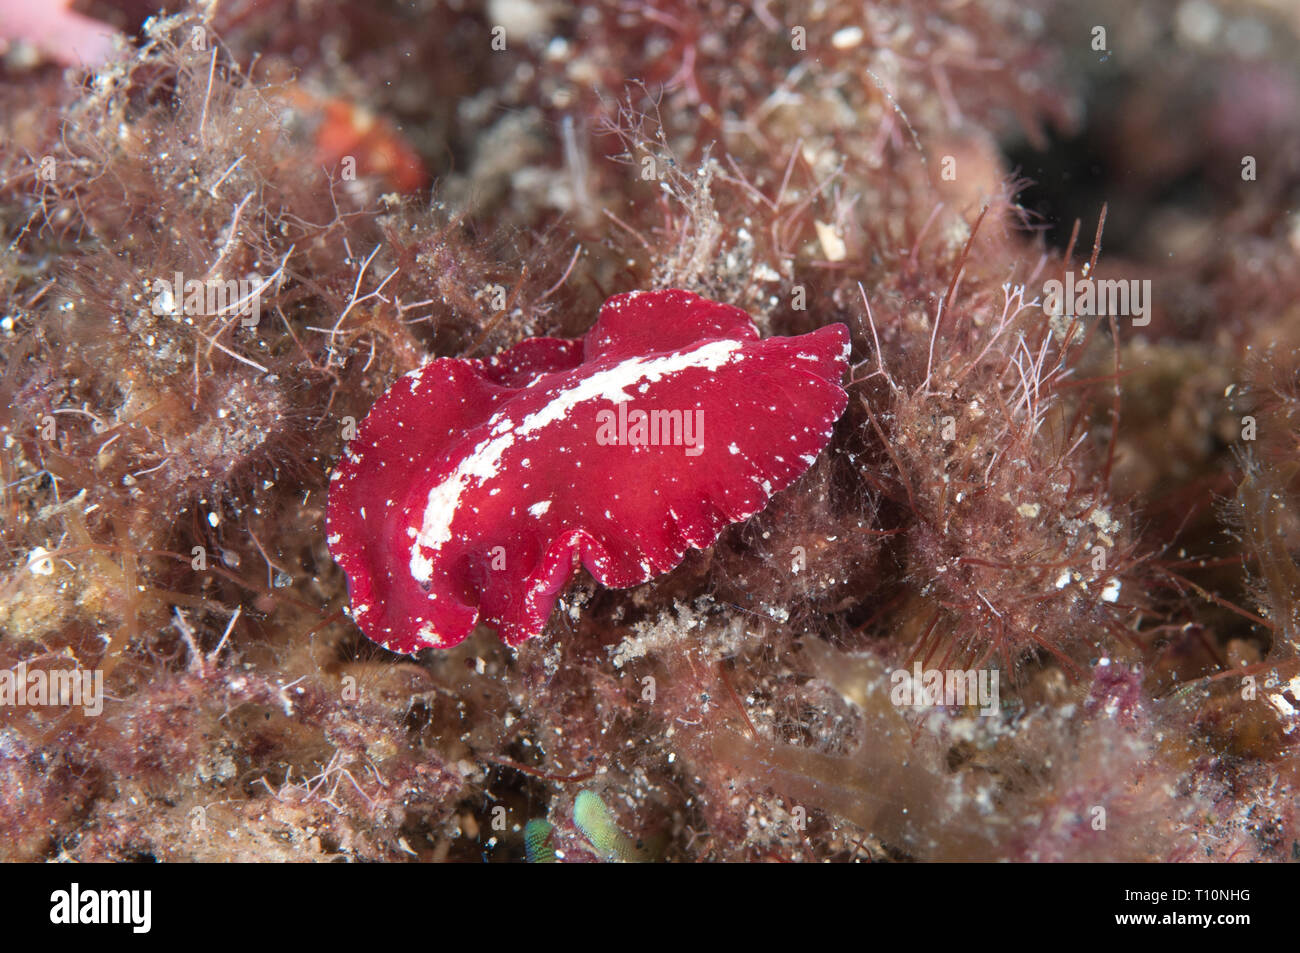 Red Dwarf Flatworm, Pseudoderos rubronanus, during night dive, Hei Nus dive site, Lembeh Straits, Sulawesi, Indonesia Stock Photo